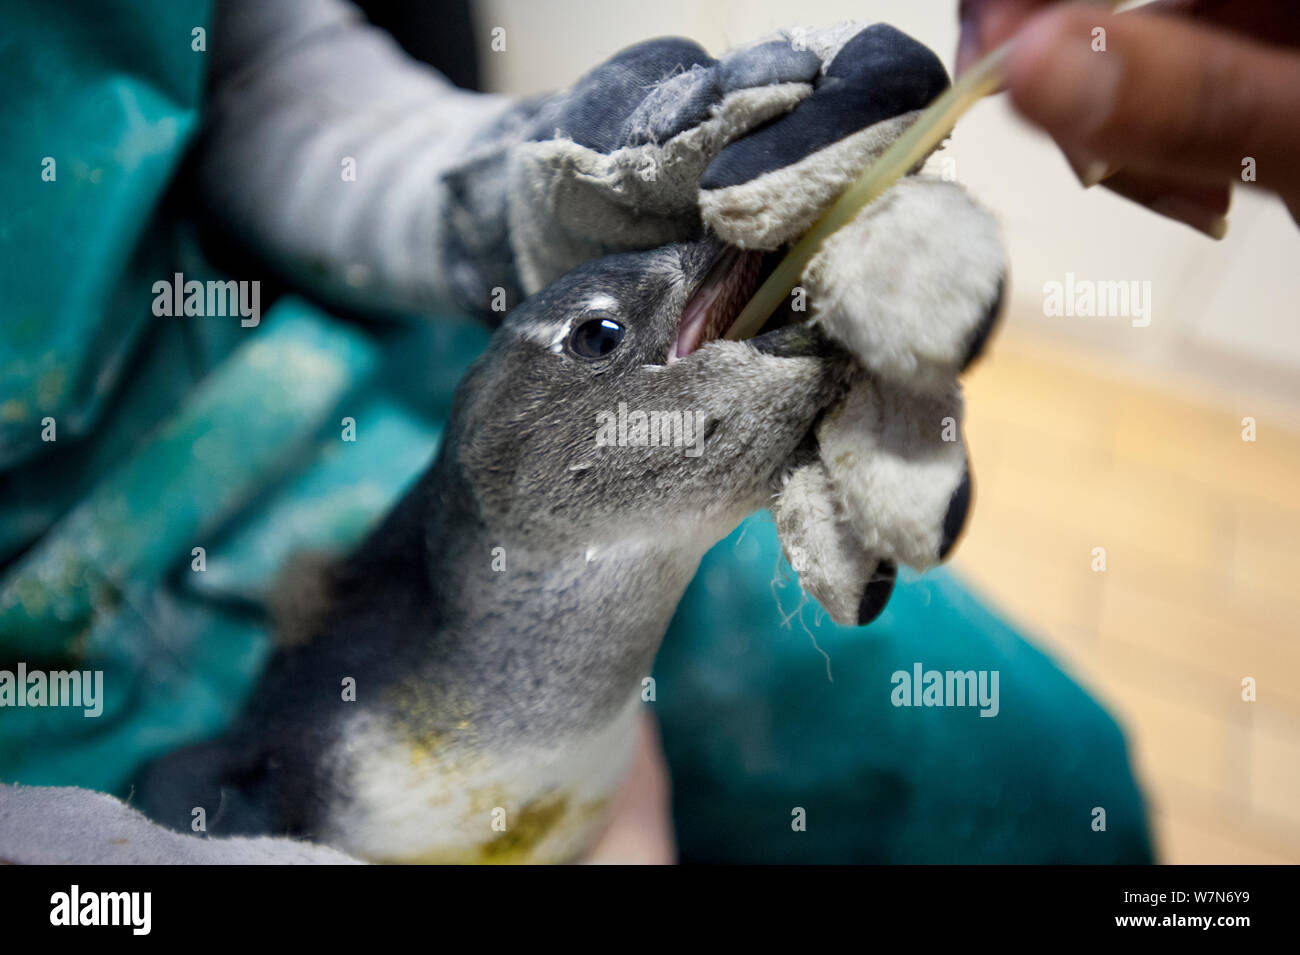 Black footed penguin (Spheniscus demersus) being hand fed rehydration liquid at the Southern African Foundation for the Conservation of Coastal Birds (SANCCOB) Cape Town, South Africa 2011 Stock Photo